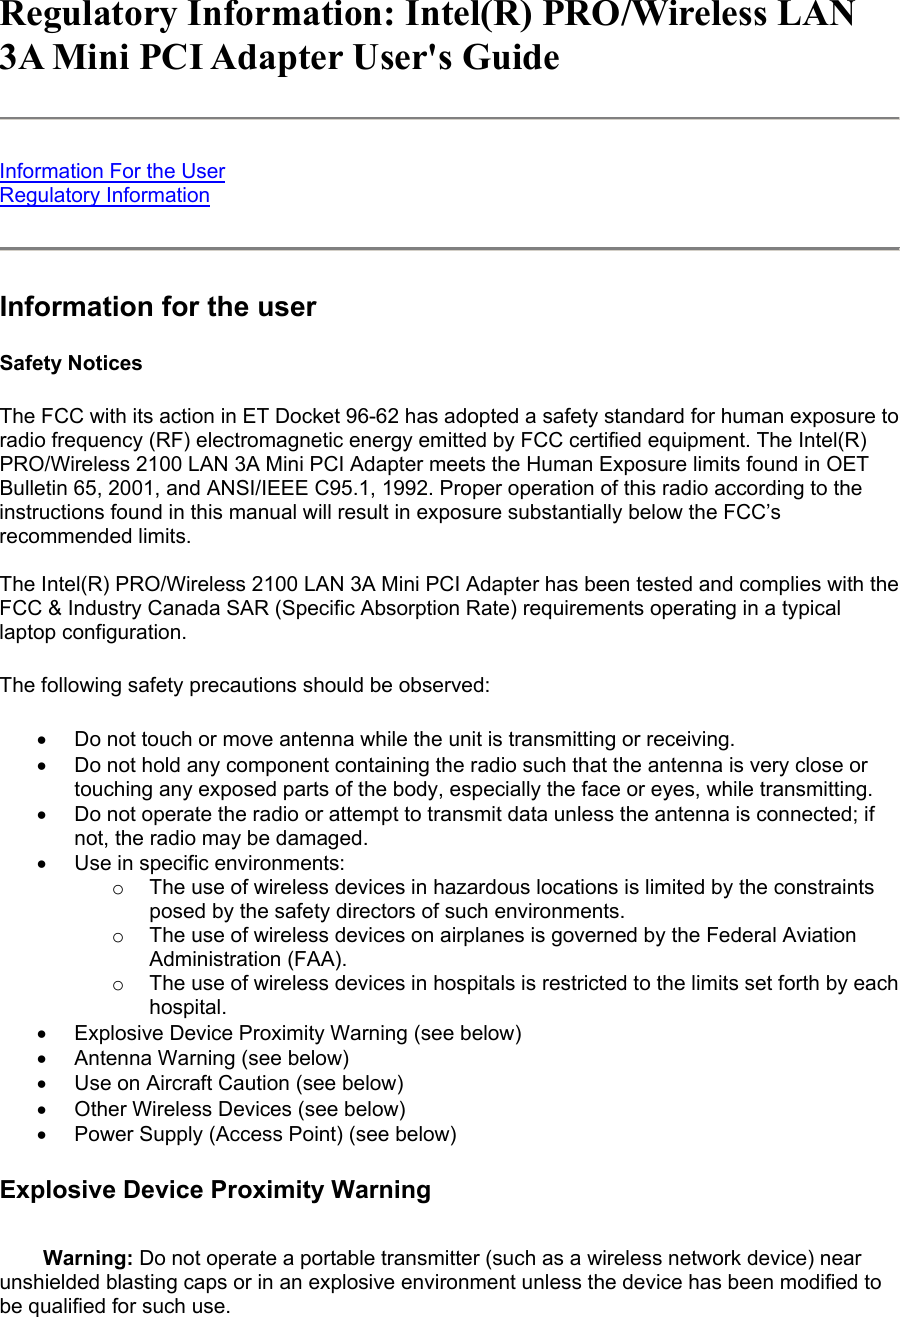 Regulatory Information: Intel(R) PRO/Wireless LAN 3A Mini PCI Adapter User&apos;s Guide  Information For the User Regulatory Information  Information for the user Safety Notices The FCC with its action in ET Docket 96-62 has adopted a safety standard for human exposure to radio frequency (RF) electromagnetic energy emitted by FCC certified equipment. The Intel(R) PRO/Wireless 2100 LAN 3A Mini PCI Adapter meets the Human Exposure limits found in OET Bulletin 65, 2001, and ANSI/IEEE C95.1, 1992. Proper operation of this radio according to the instructions found in this manual will result in exposure substantially below the FCC’s recommended limits.  The Intel(R) PRO/Wireless 2100 LAN 3A Mini PCI Adapter has been tested and complies with the FCC &amp; Industry Canada SAR (Specific Absorption Rate) requirements operating in a typical laptop configuration.  The following safety precautions should be observed: •  Do not touch or move antenna while the unit is transmitting or receiving.  •  Do not hold any component containing the radio such that the antenna is very close or touching any exposed parts of the body, especially the face or eyes, while transmitting.  •  Do not operate the radio or attempt to transmit data unless the antenna is connected; if not, the radio may be damaged.  •  Use in specific environments:  o  The use of wireless devices in hazardous locations is limited by the constraints posed by the safety directors of such environments.  o  The use of wireless devices on airplanes is governed by the Federal Aviation Administration (FAA).  o  The use of wireless devices in hospitals is restricted to the limits set forth by each hospital.  •  Explosive Device Proximity Warning (see below)  •  Antenna Warning (see below)  •  Use on Aircraft Caution (see below)  •  Other Wireless Devices (see below)  •  Power Supply (Access Point) (see below)  Explosive Device Proximity Warning Warning: Do not operate a portable transmitter (such as a wireless network device) near unshielded blasting caps or in an explosive environment unless the device has been modified to be qualified for such use. 